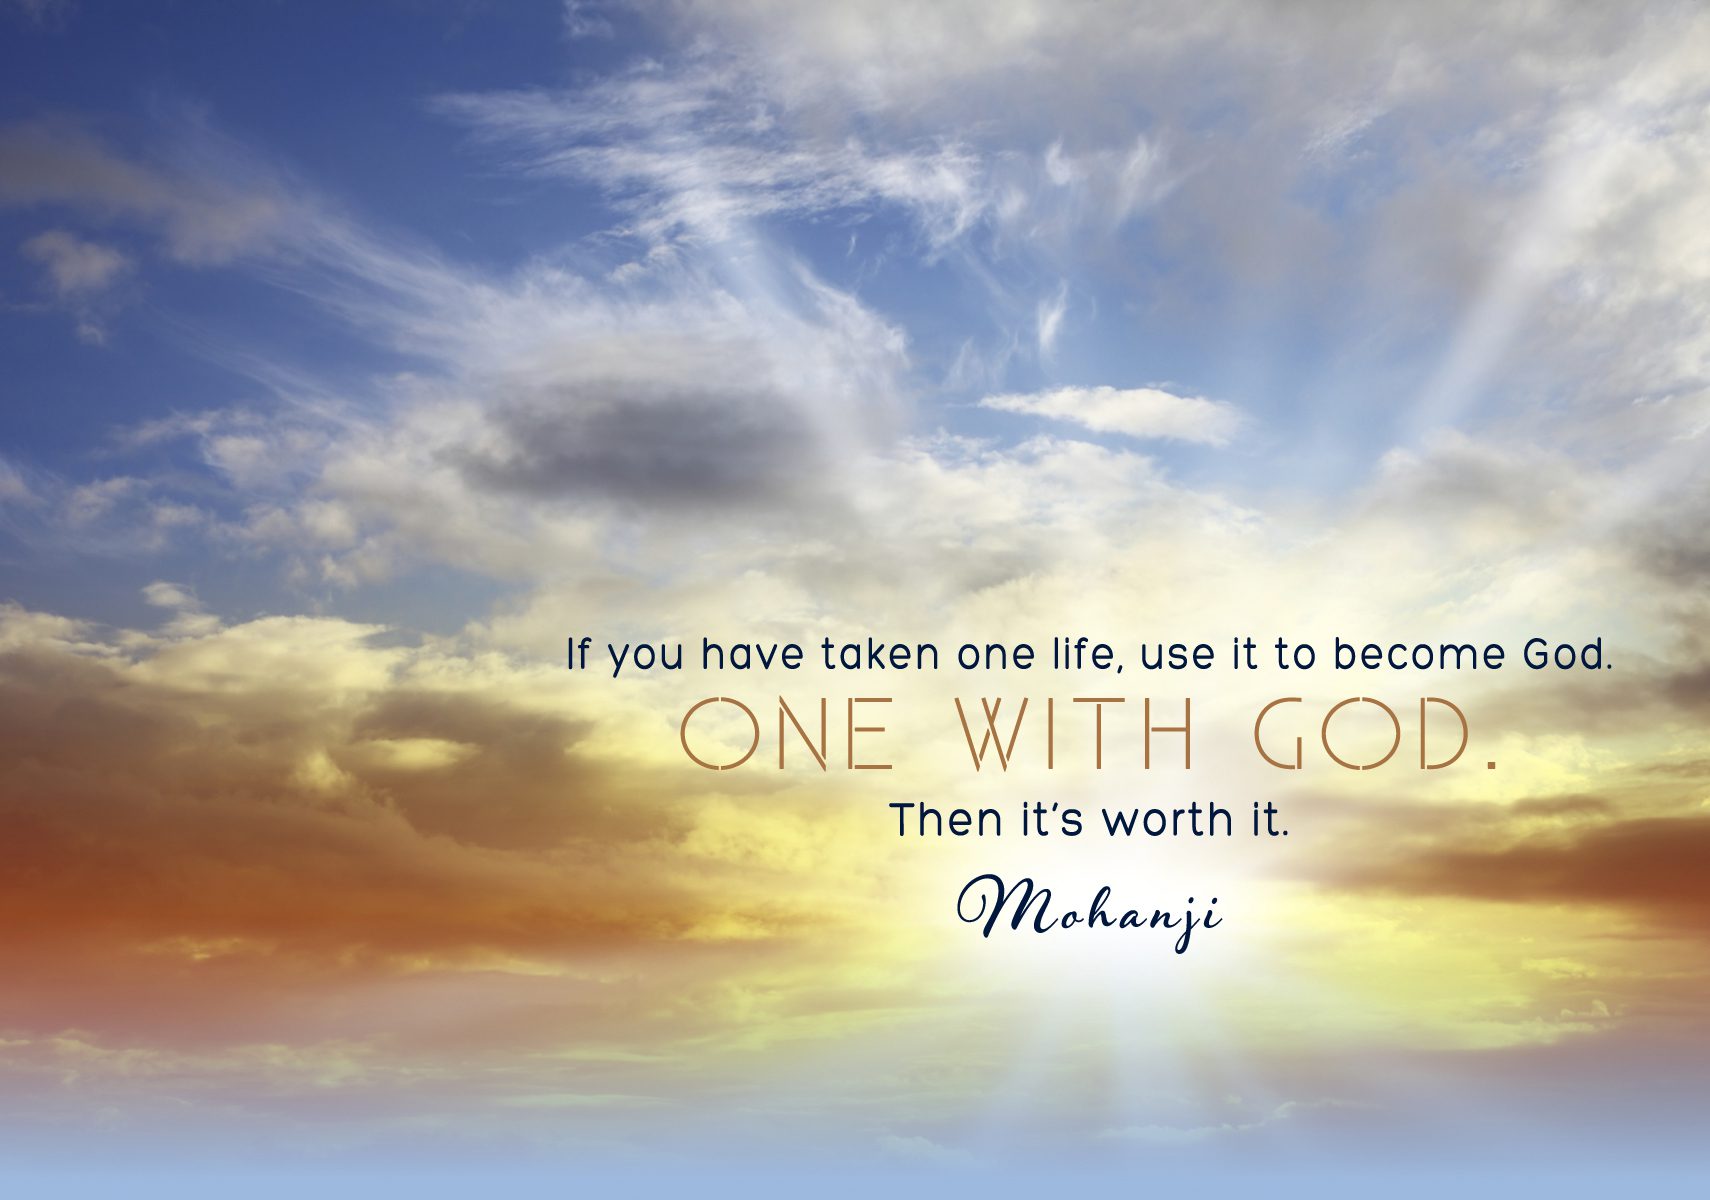 Mohanji quote - If you have taken one life, use it to become God - What is a Guru 